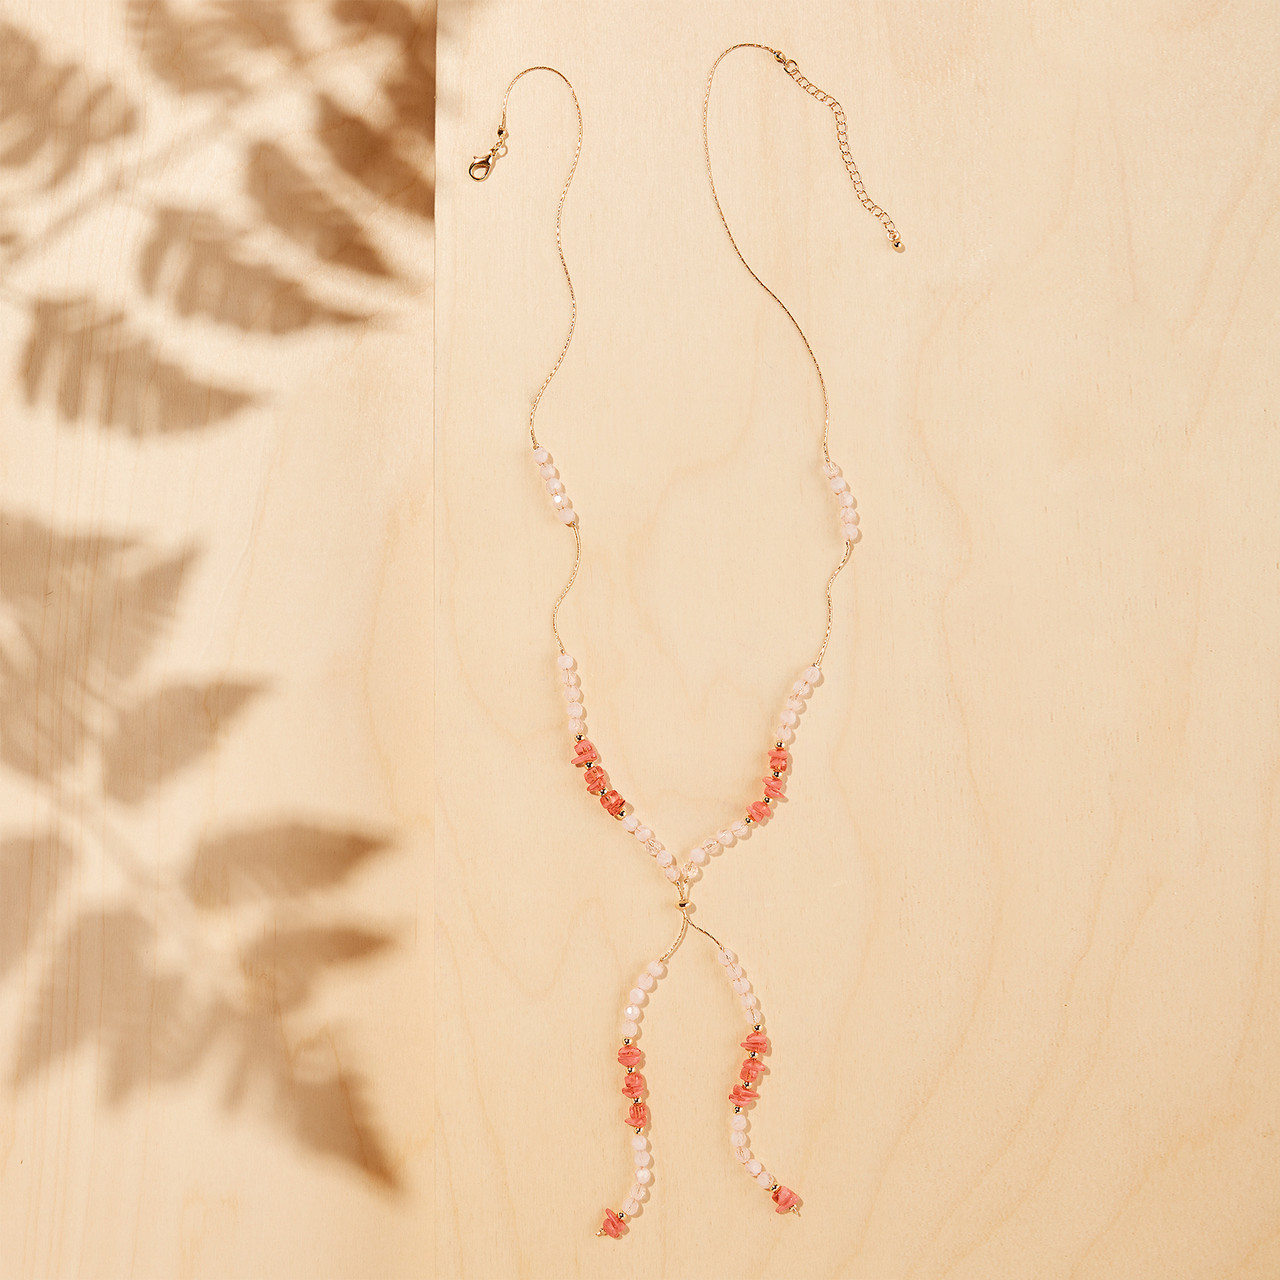 Beaded Lariat Necklace 'Summer Glow' – Bead Free Forever